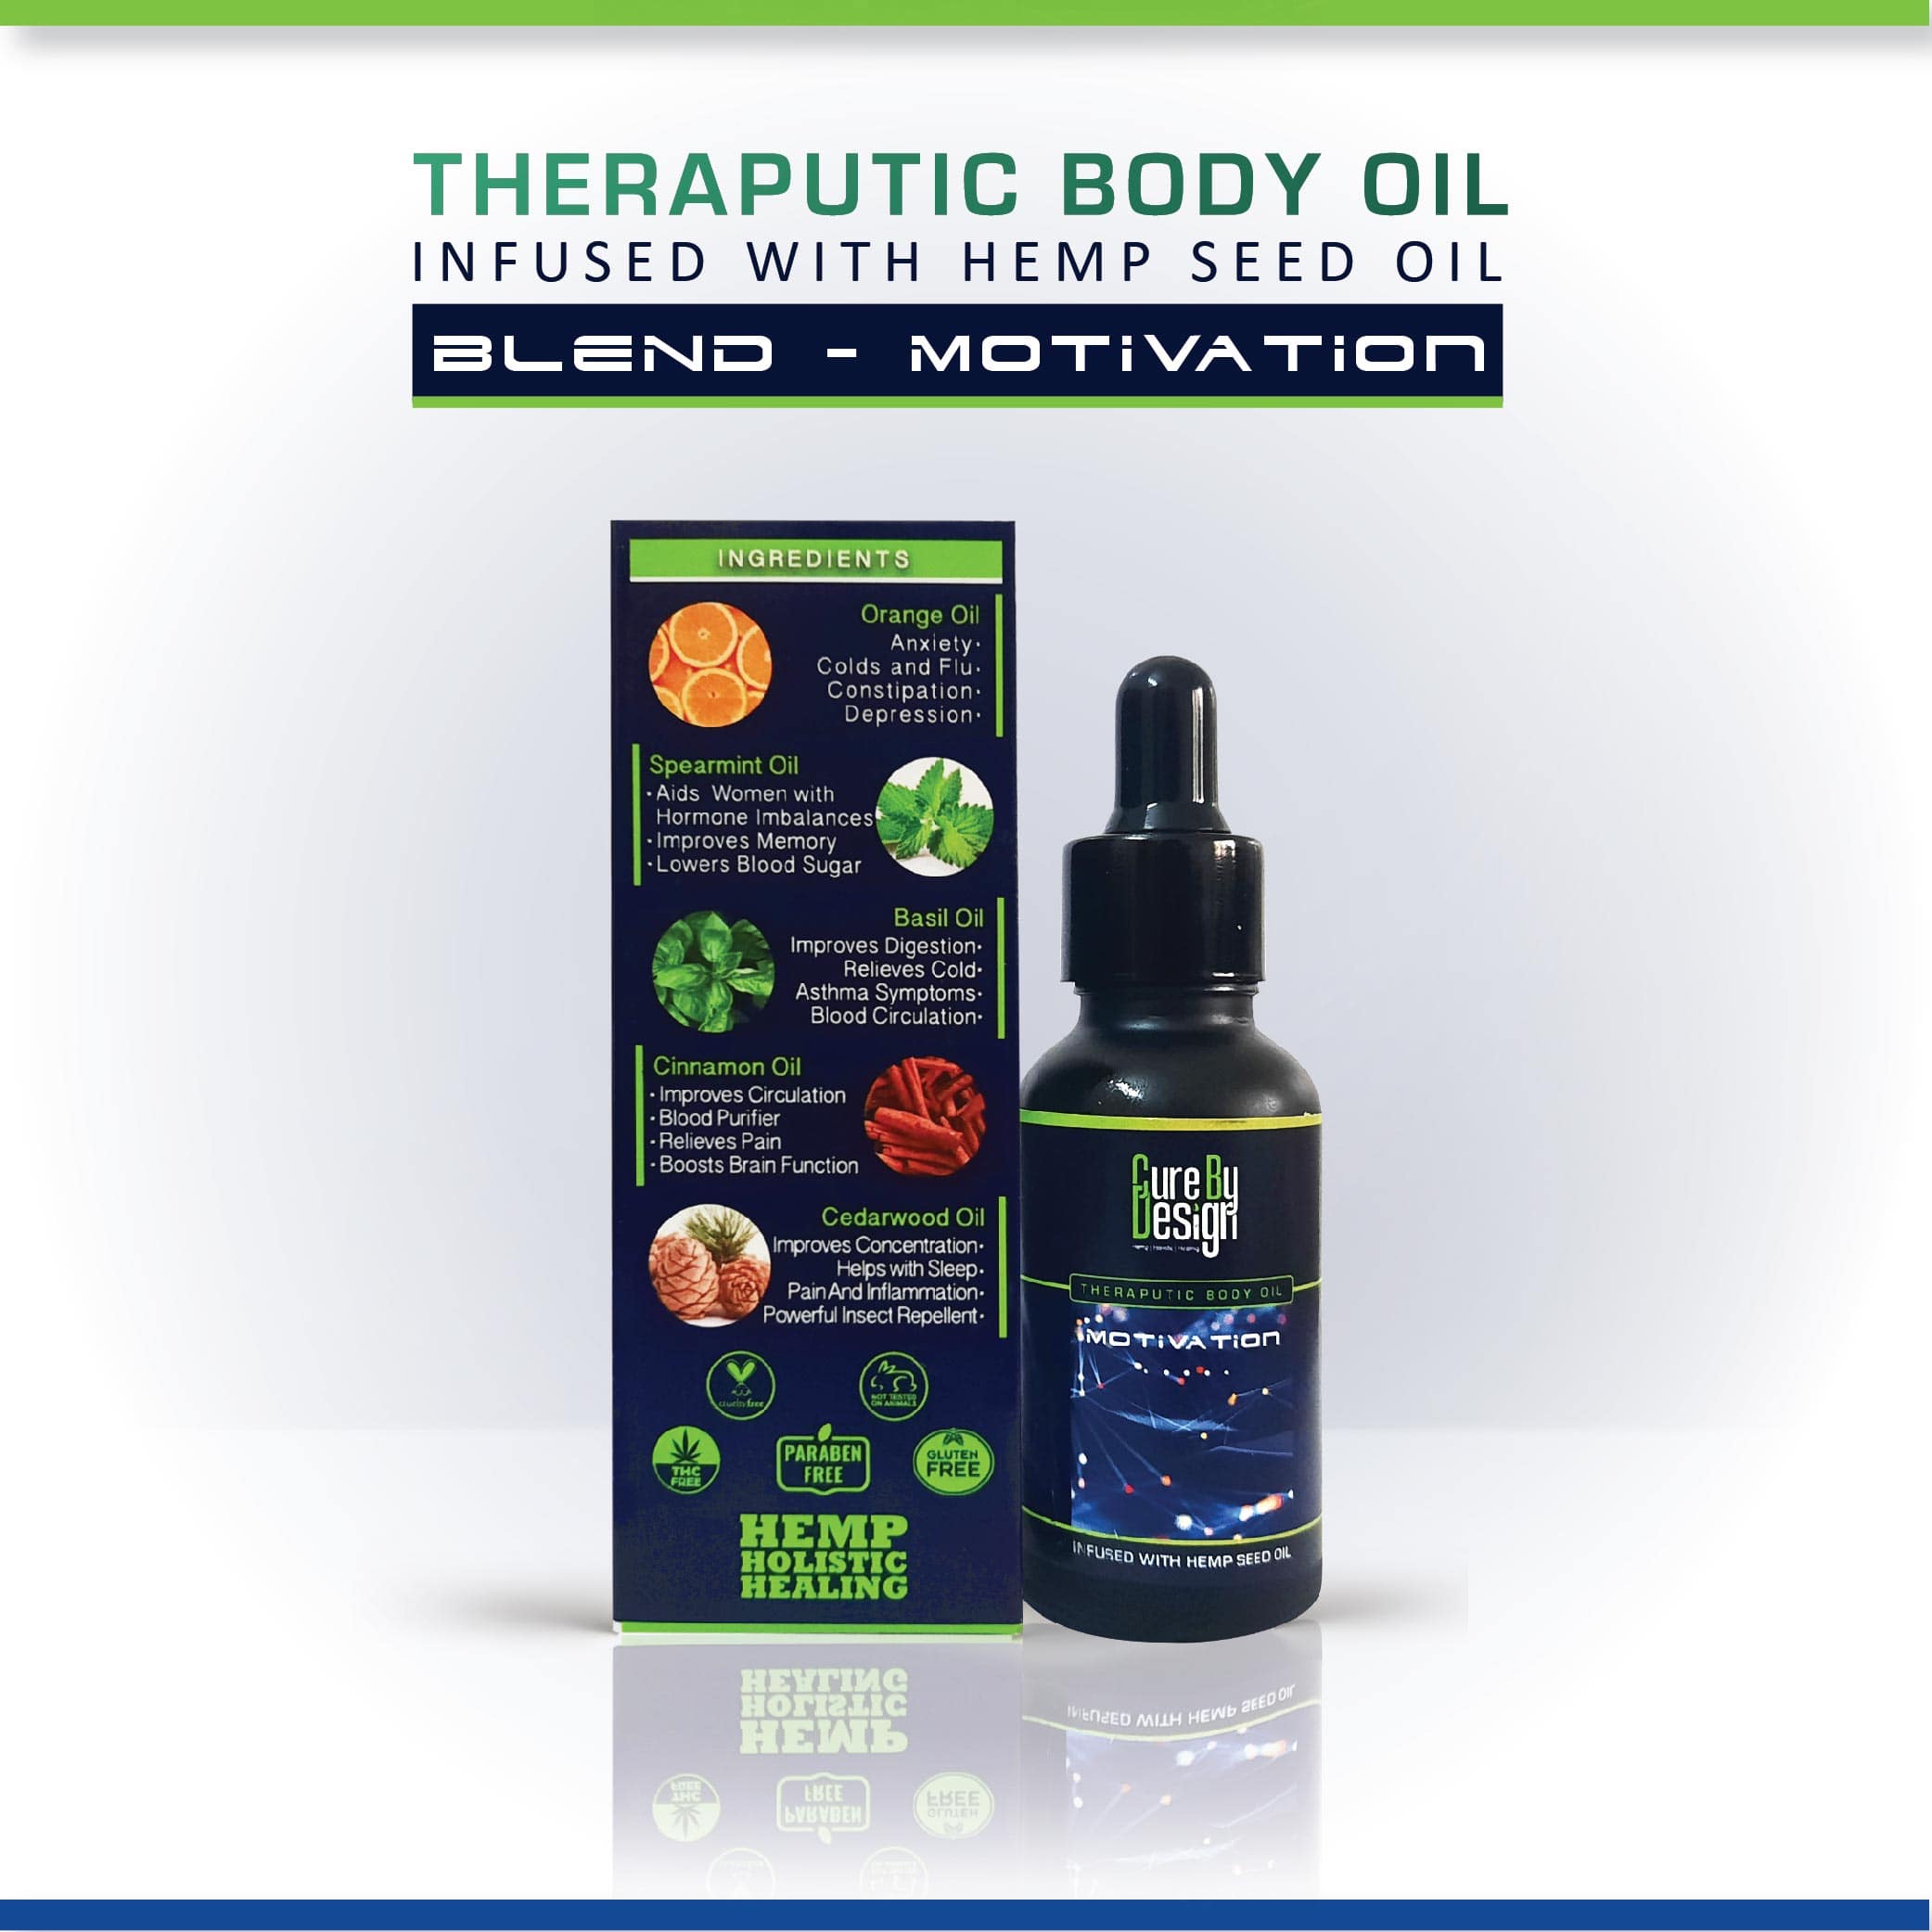 Cure By Design Theraputic Body Oil Infused with Hemp Seed Oil for Motivation